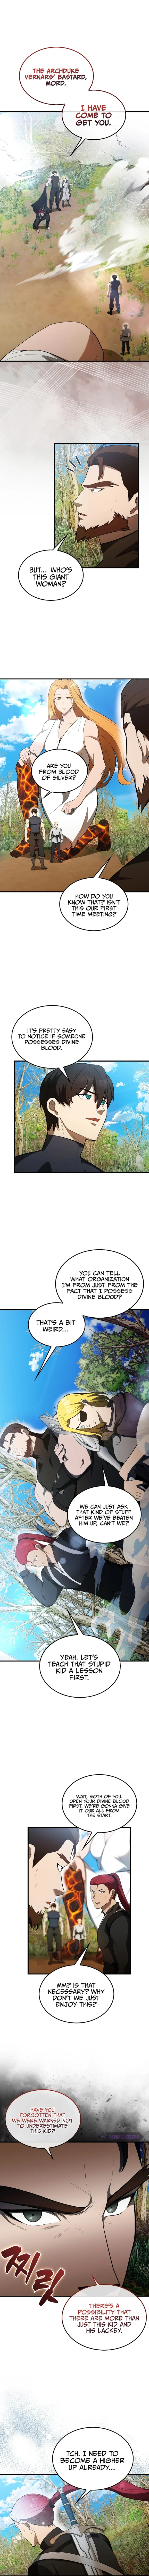 the-extra-is-too-strong-chap-34-0